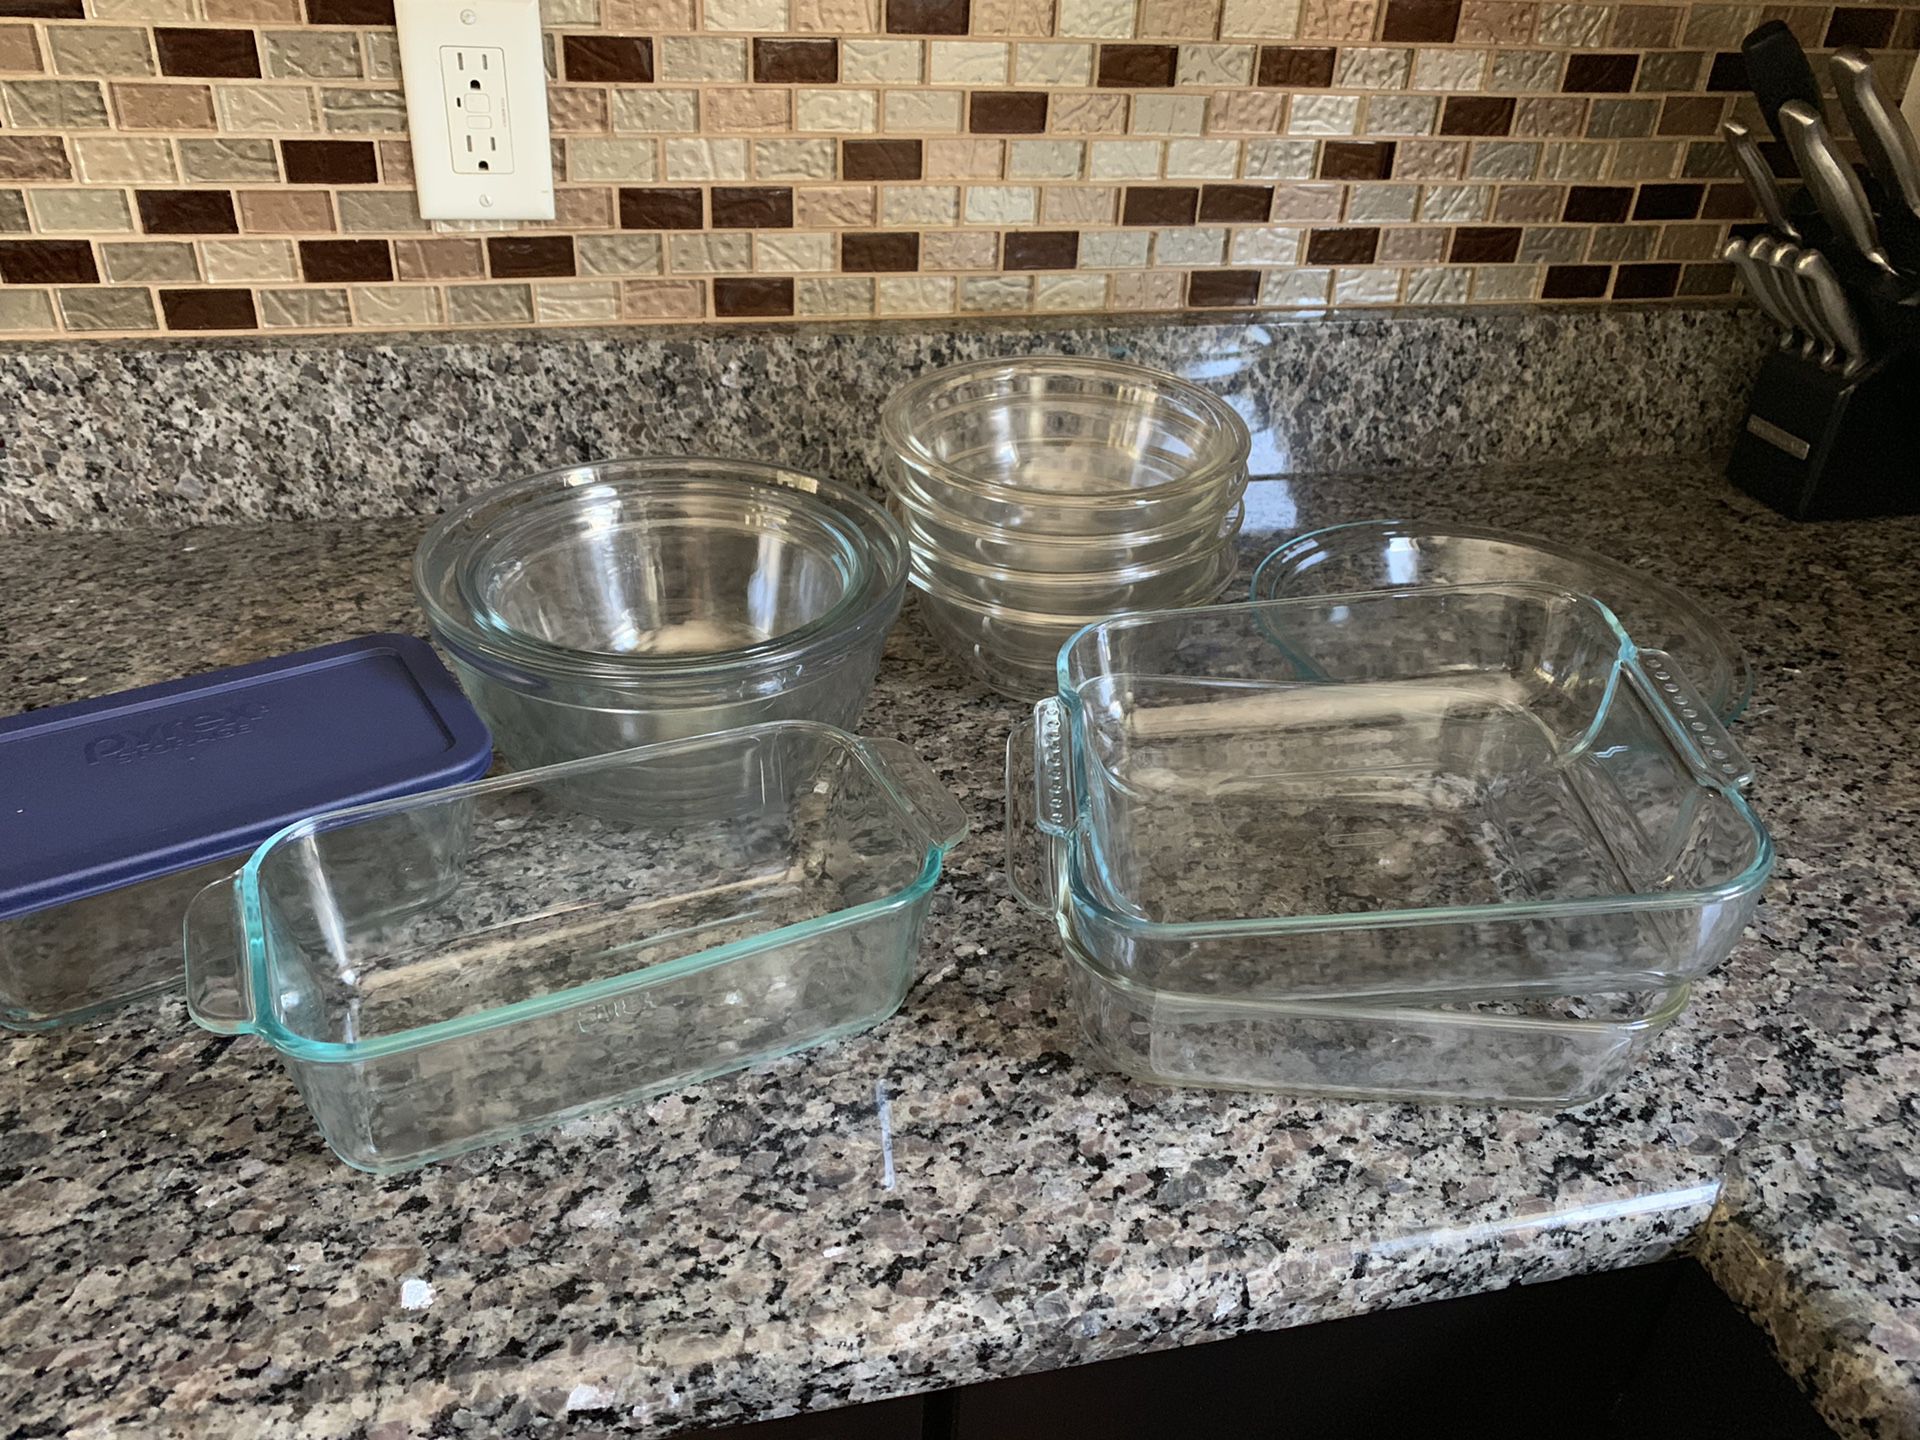 Assorted glass bowls and baking dishes